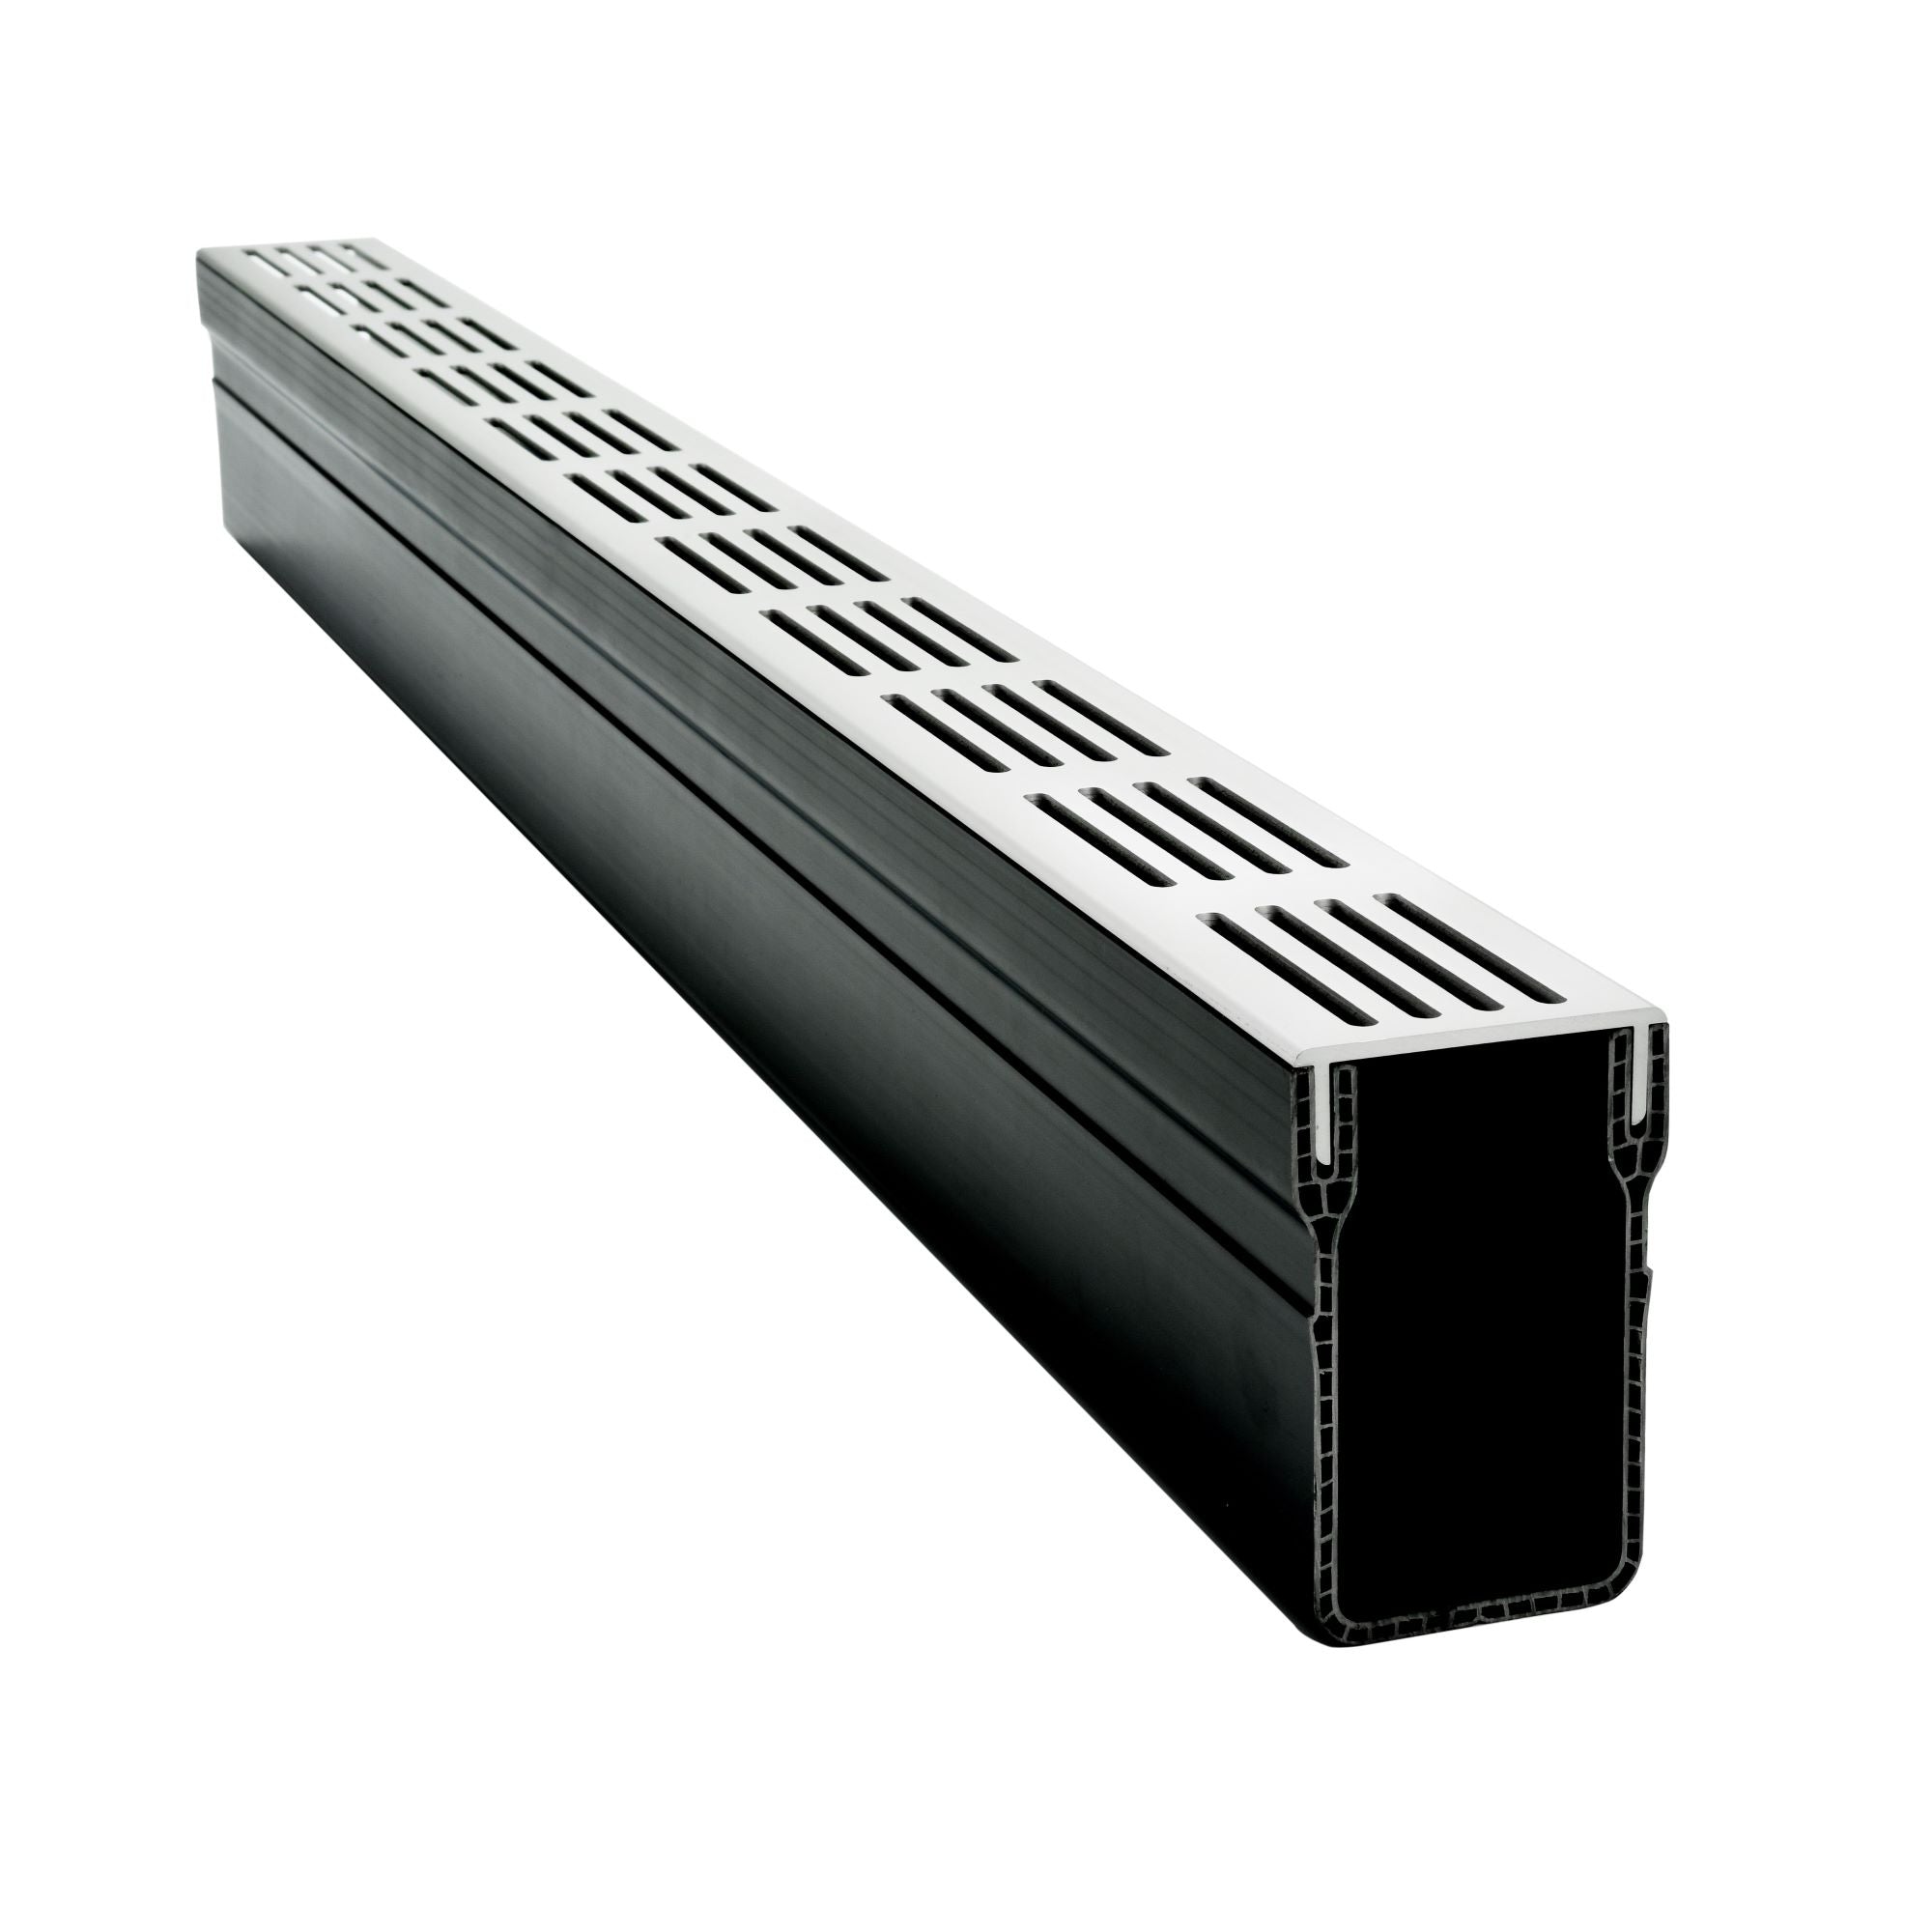 1m Threshold Slim Drain with Stainless Steel Grating (65 x 100mm Deep)